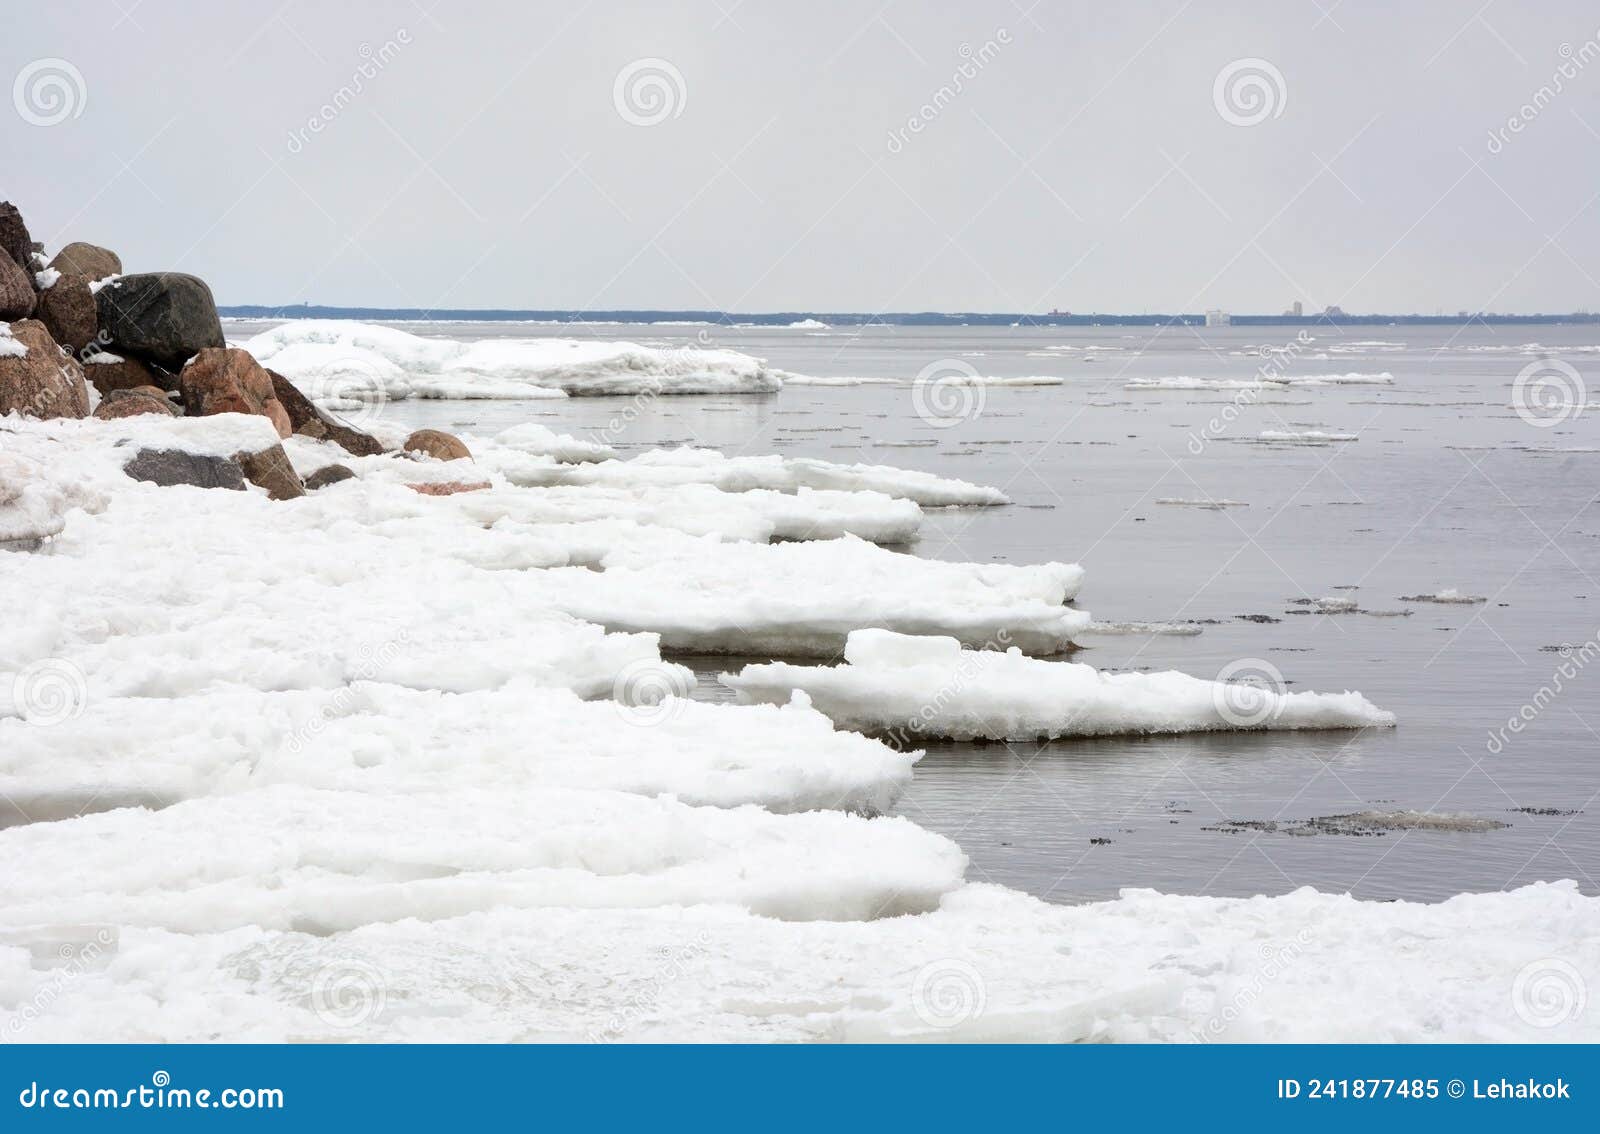 The Frozen Coast of the Gulf of Finland with a Bizarre Form of Ice